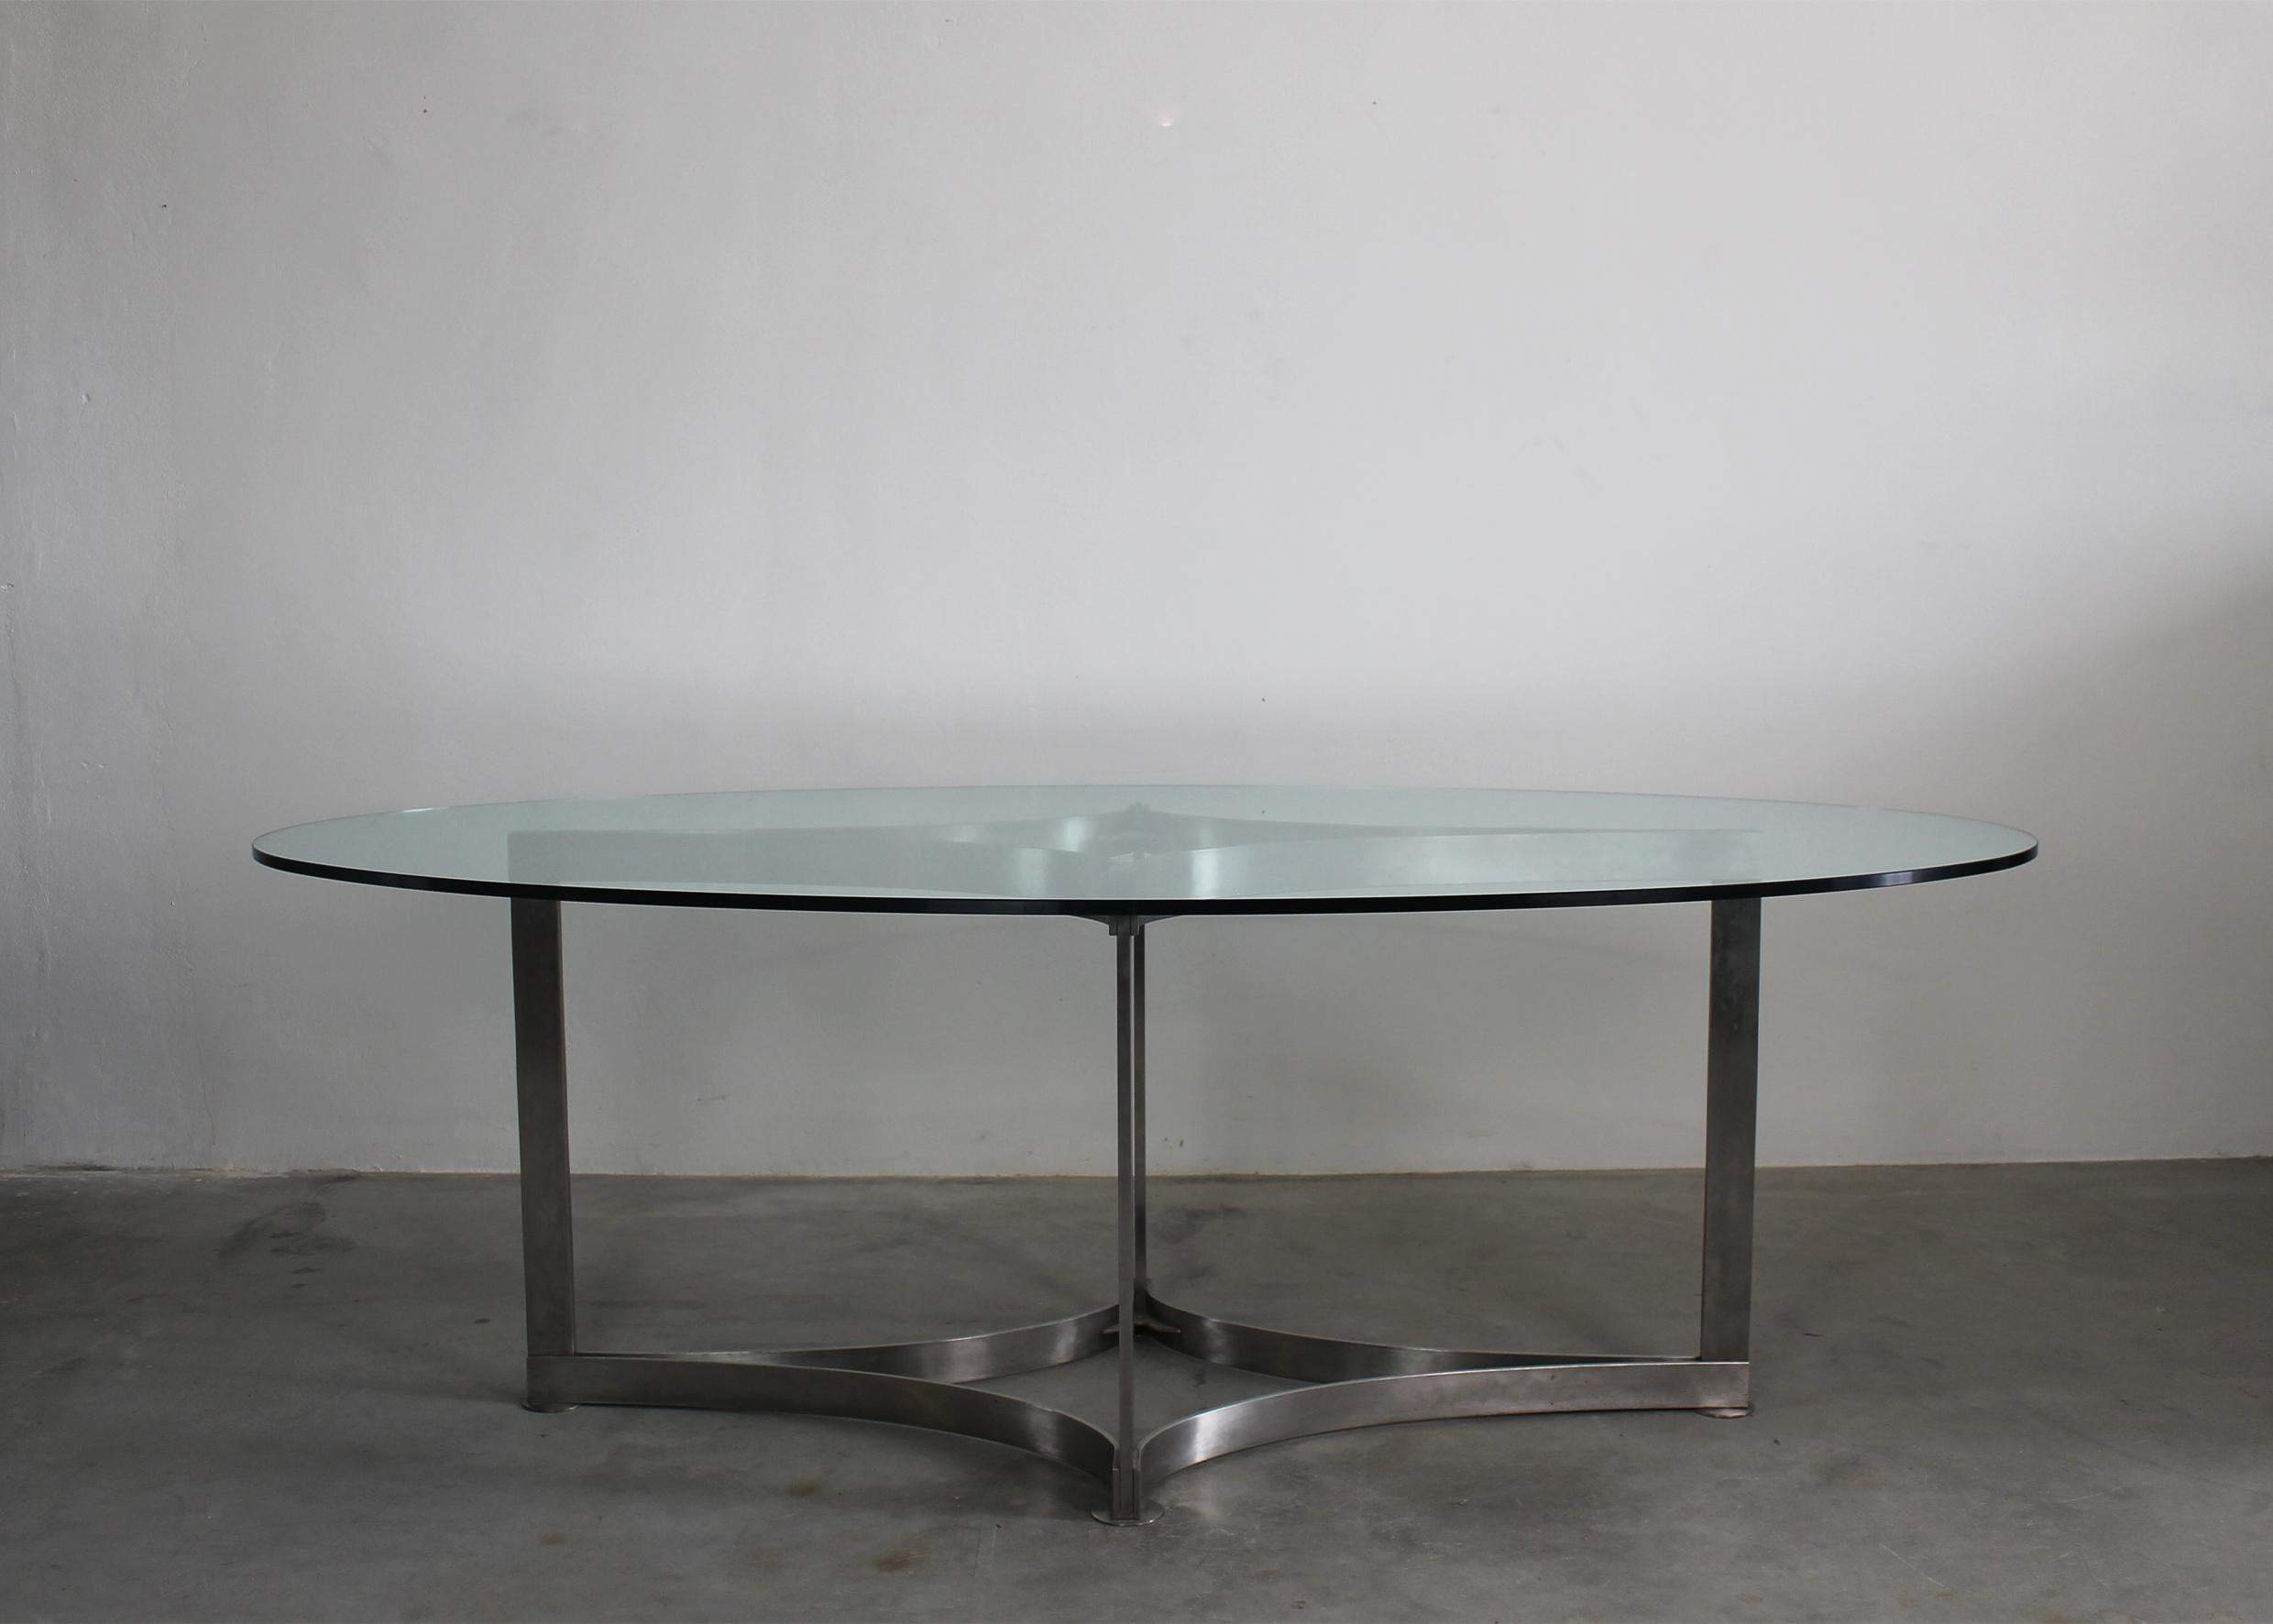 Very rare dining table with a beautiful base in steel and an oval-shaped top in thick glass, designed by Vittorio Introini and manufactured by Saporiti in 1970s.

Vittorio Introini is an Italian designer and artist of postwar and contemporary art